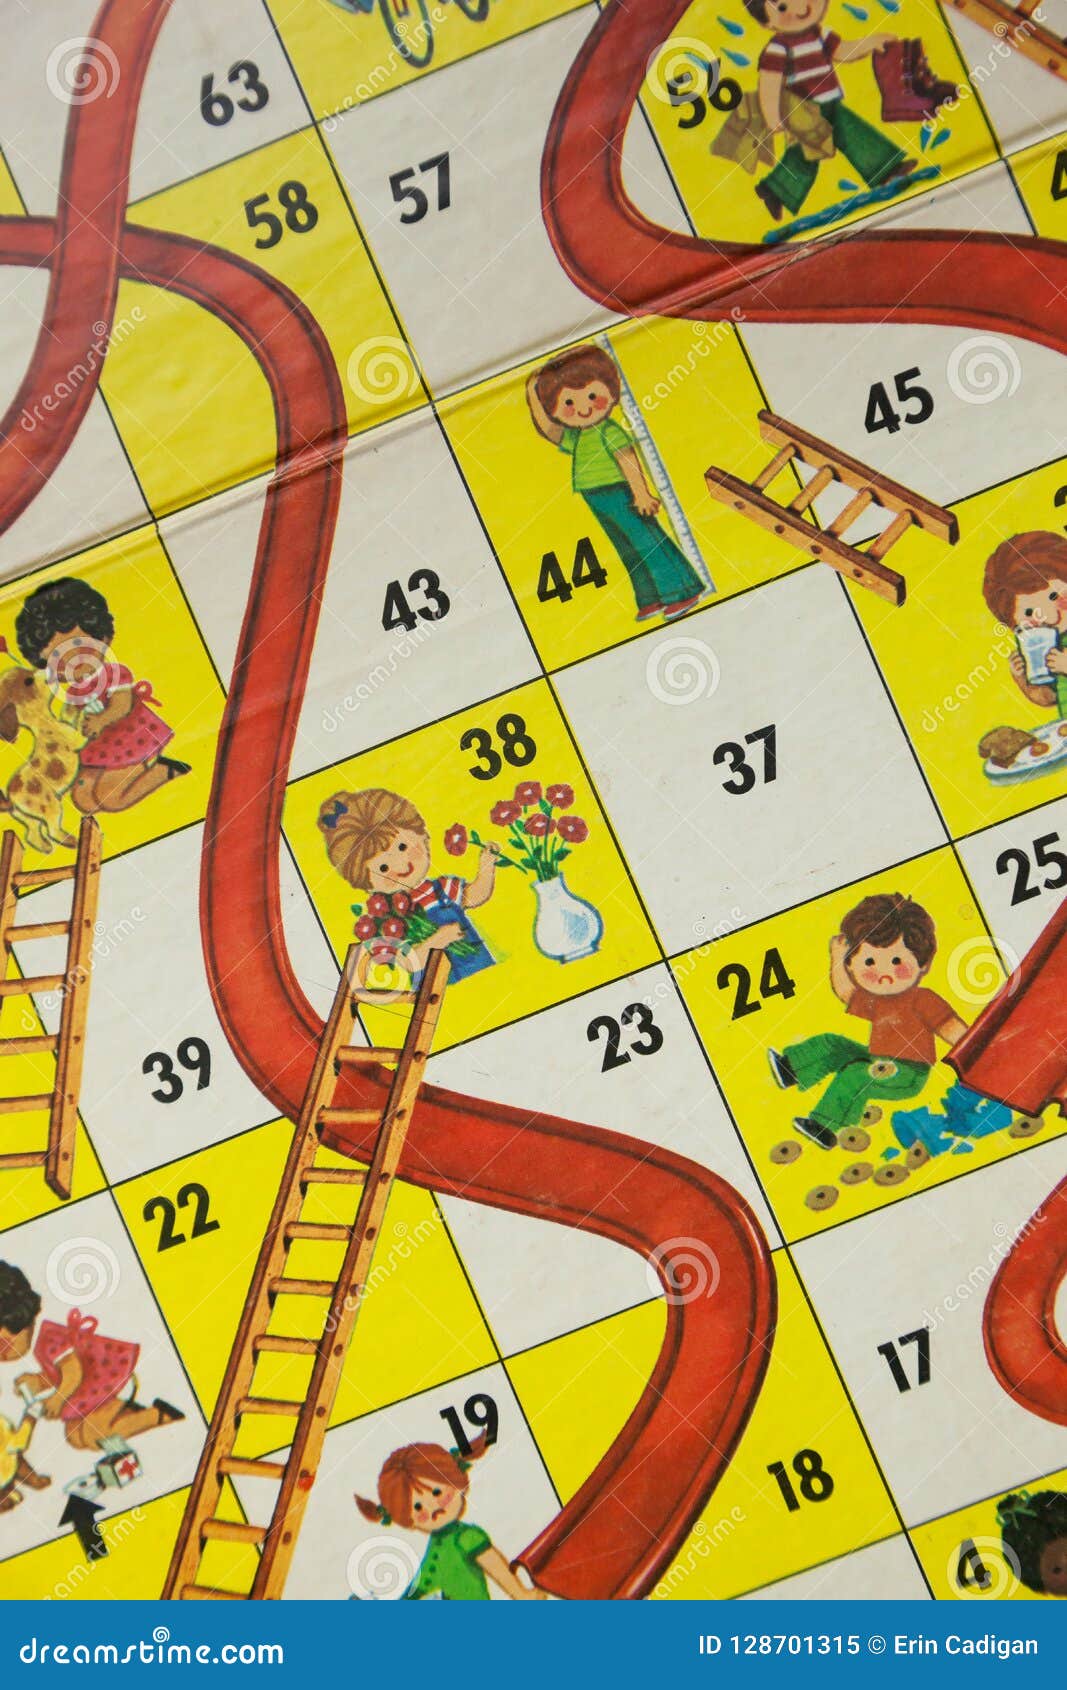 simpleimage chutes and ladders